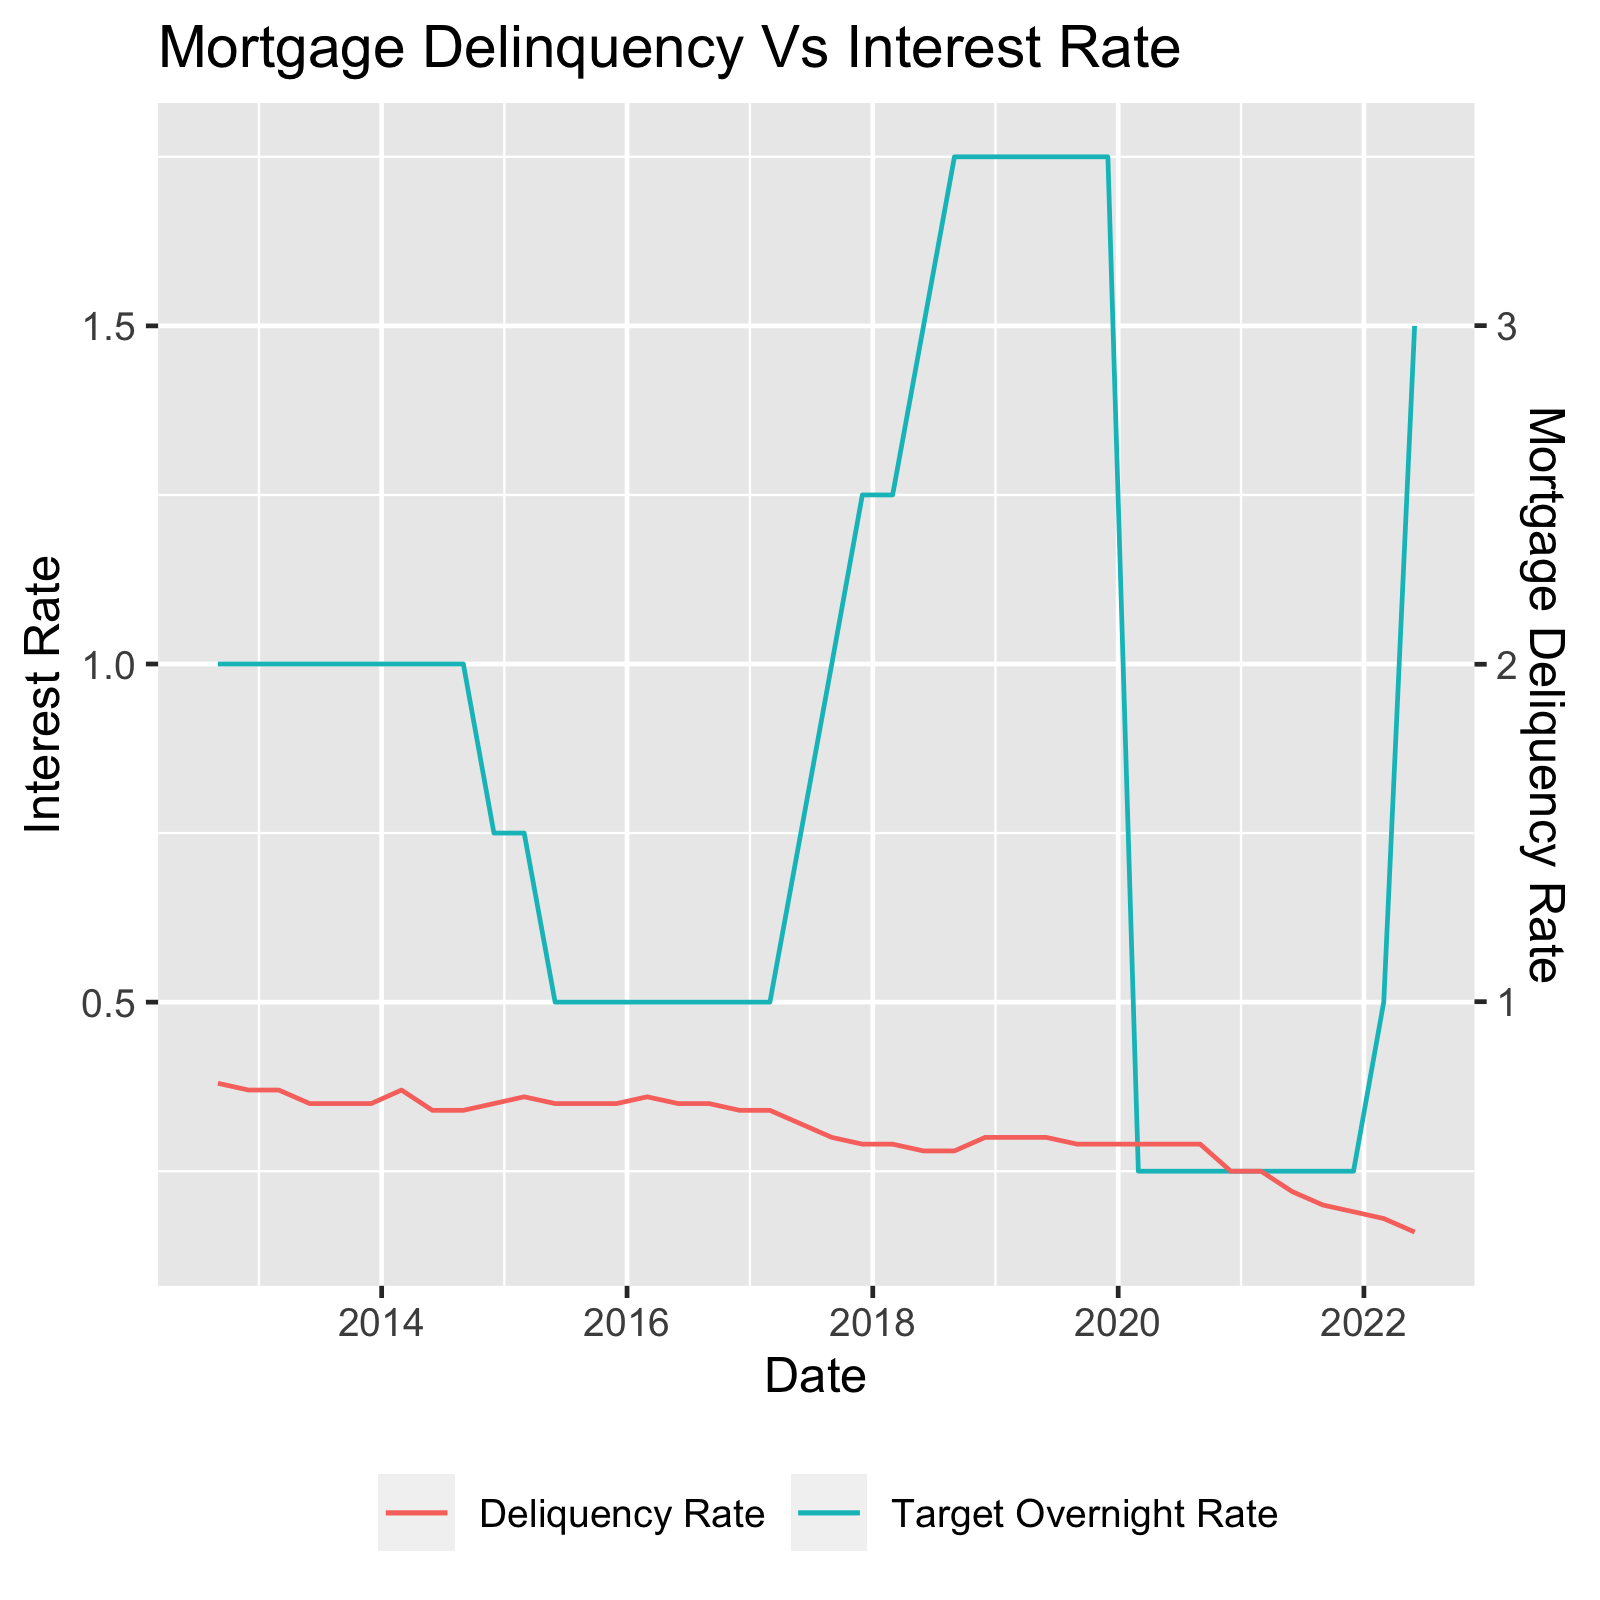 Line chart showing Mortgage Delinquency Rate Vs Interest Rate